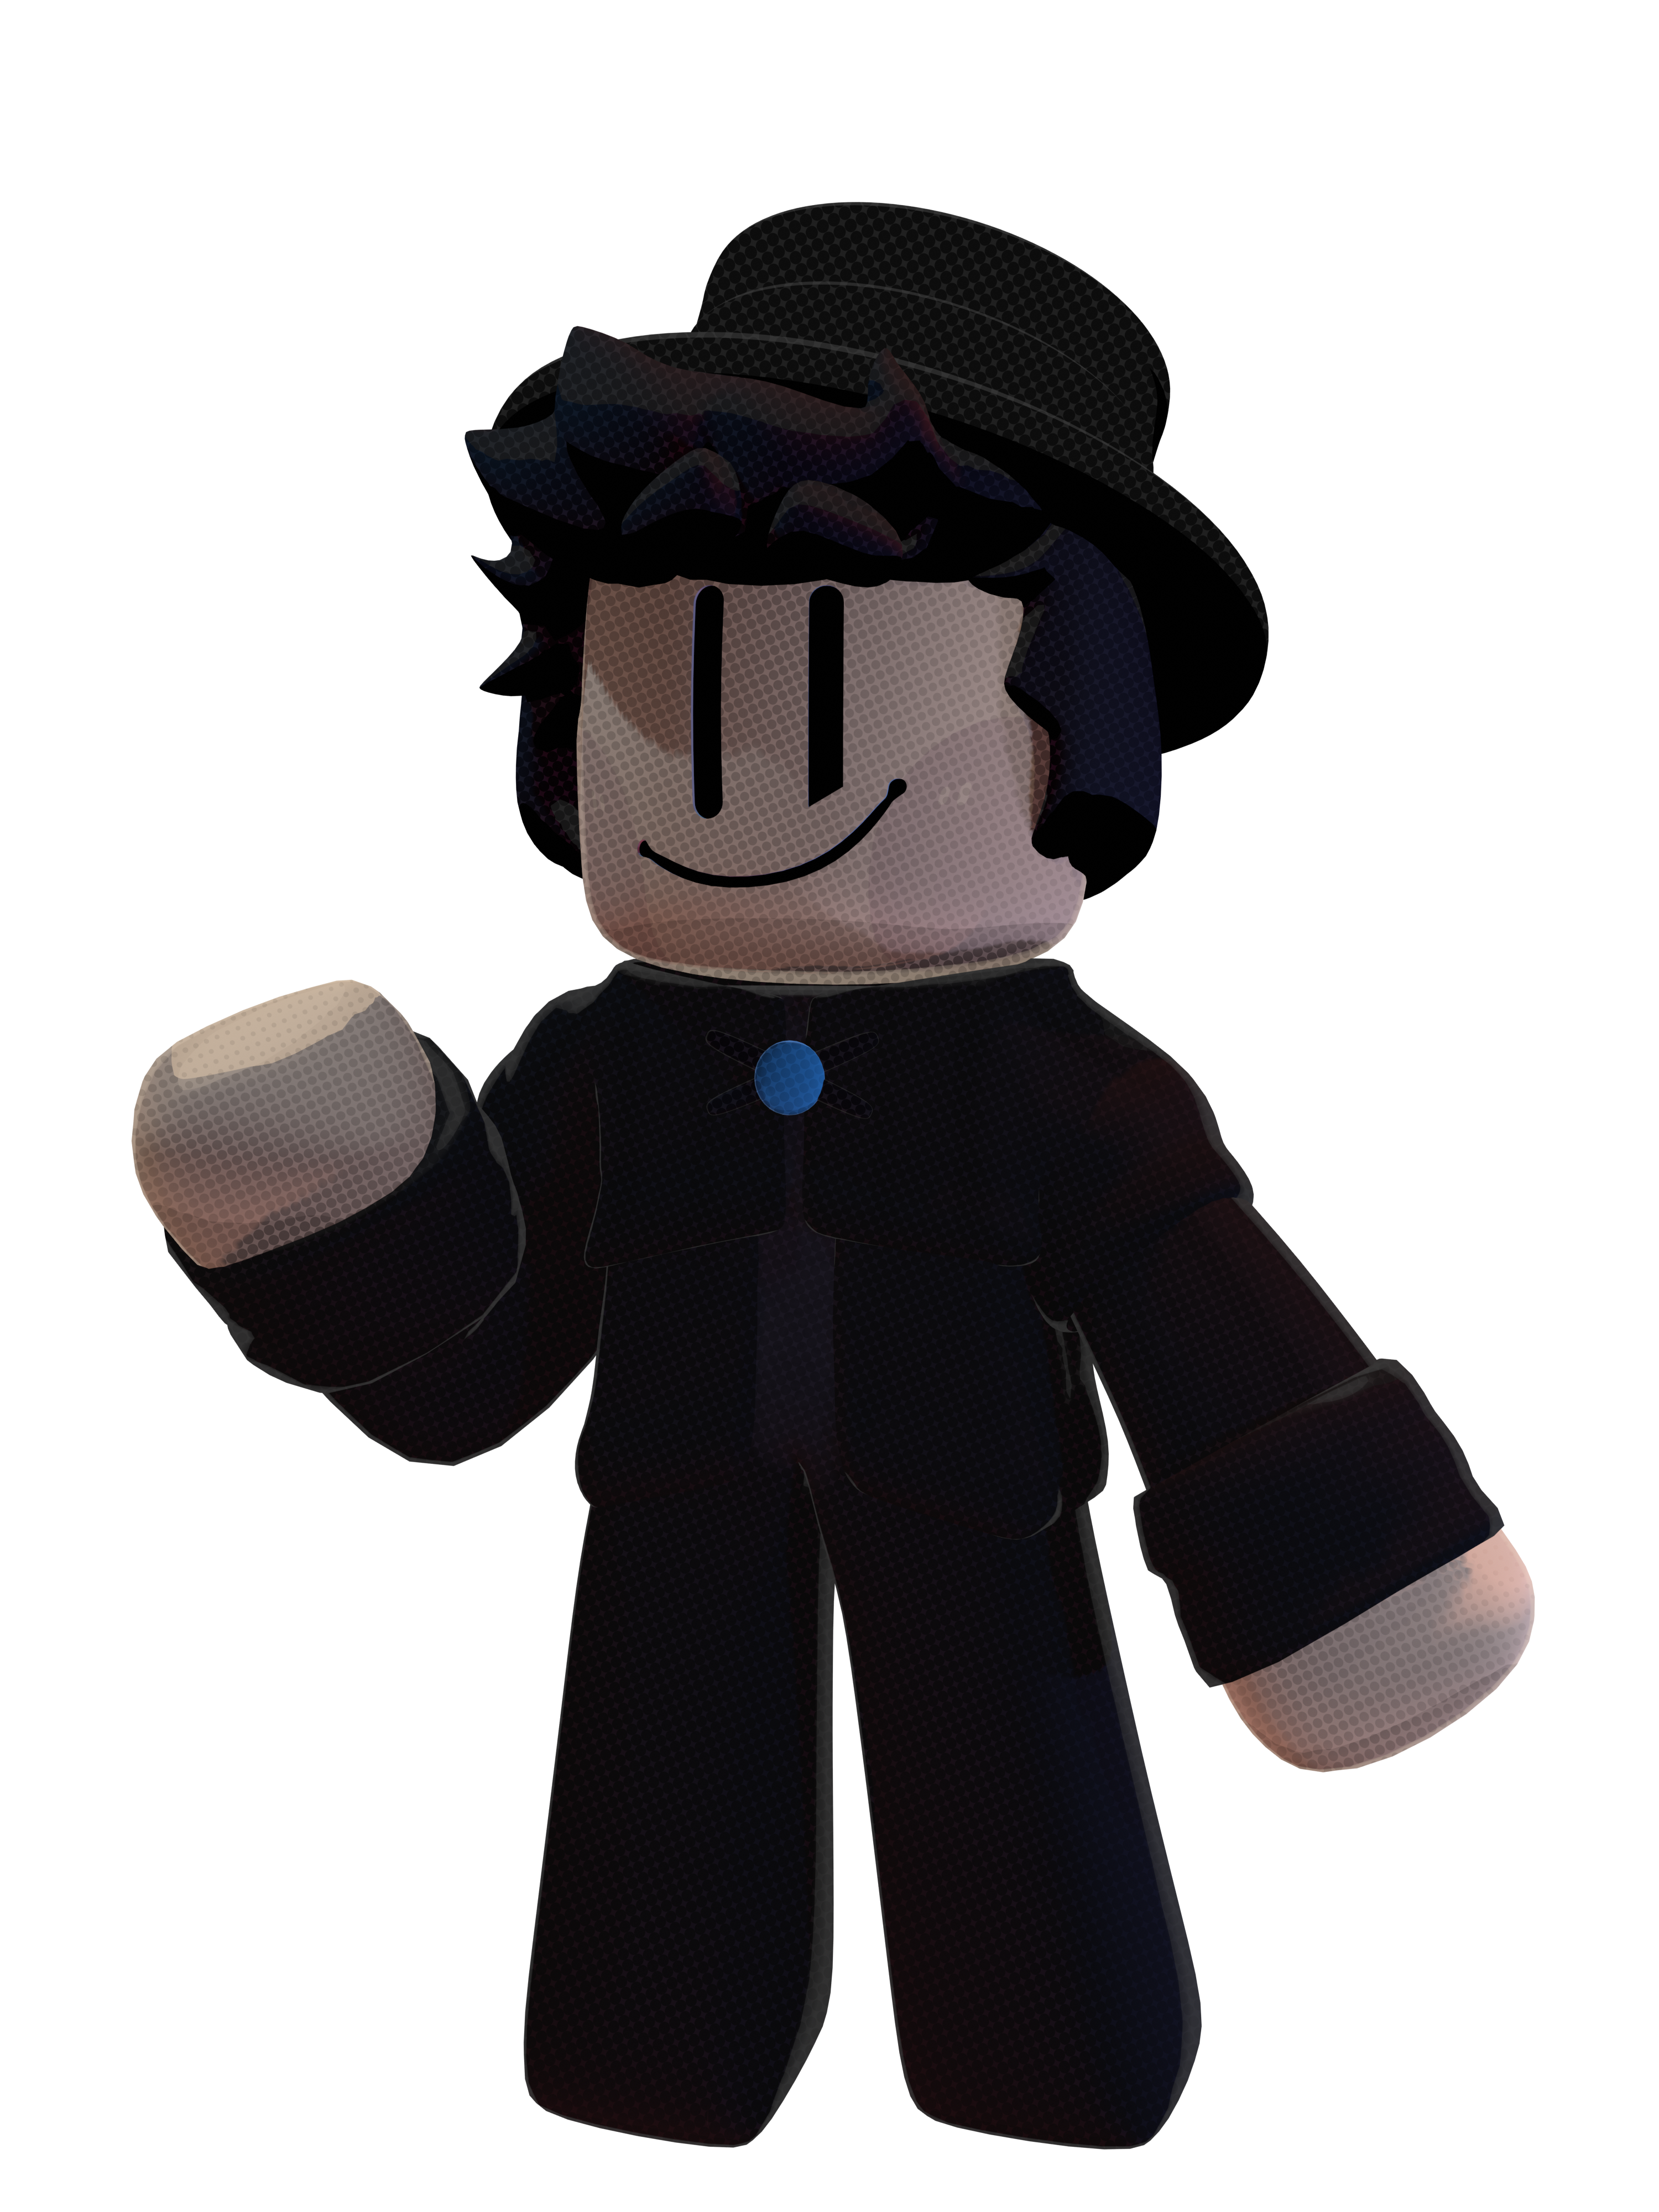 Roblox Nicolaixeno Character Wip By Nicolaixeno On Deviantart - roblox characters looking like a instagramer